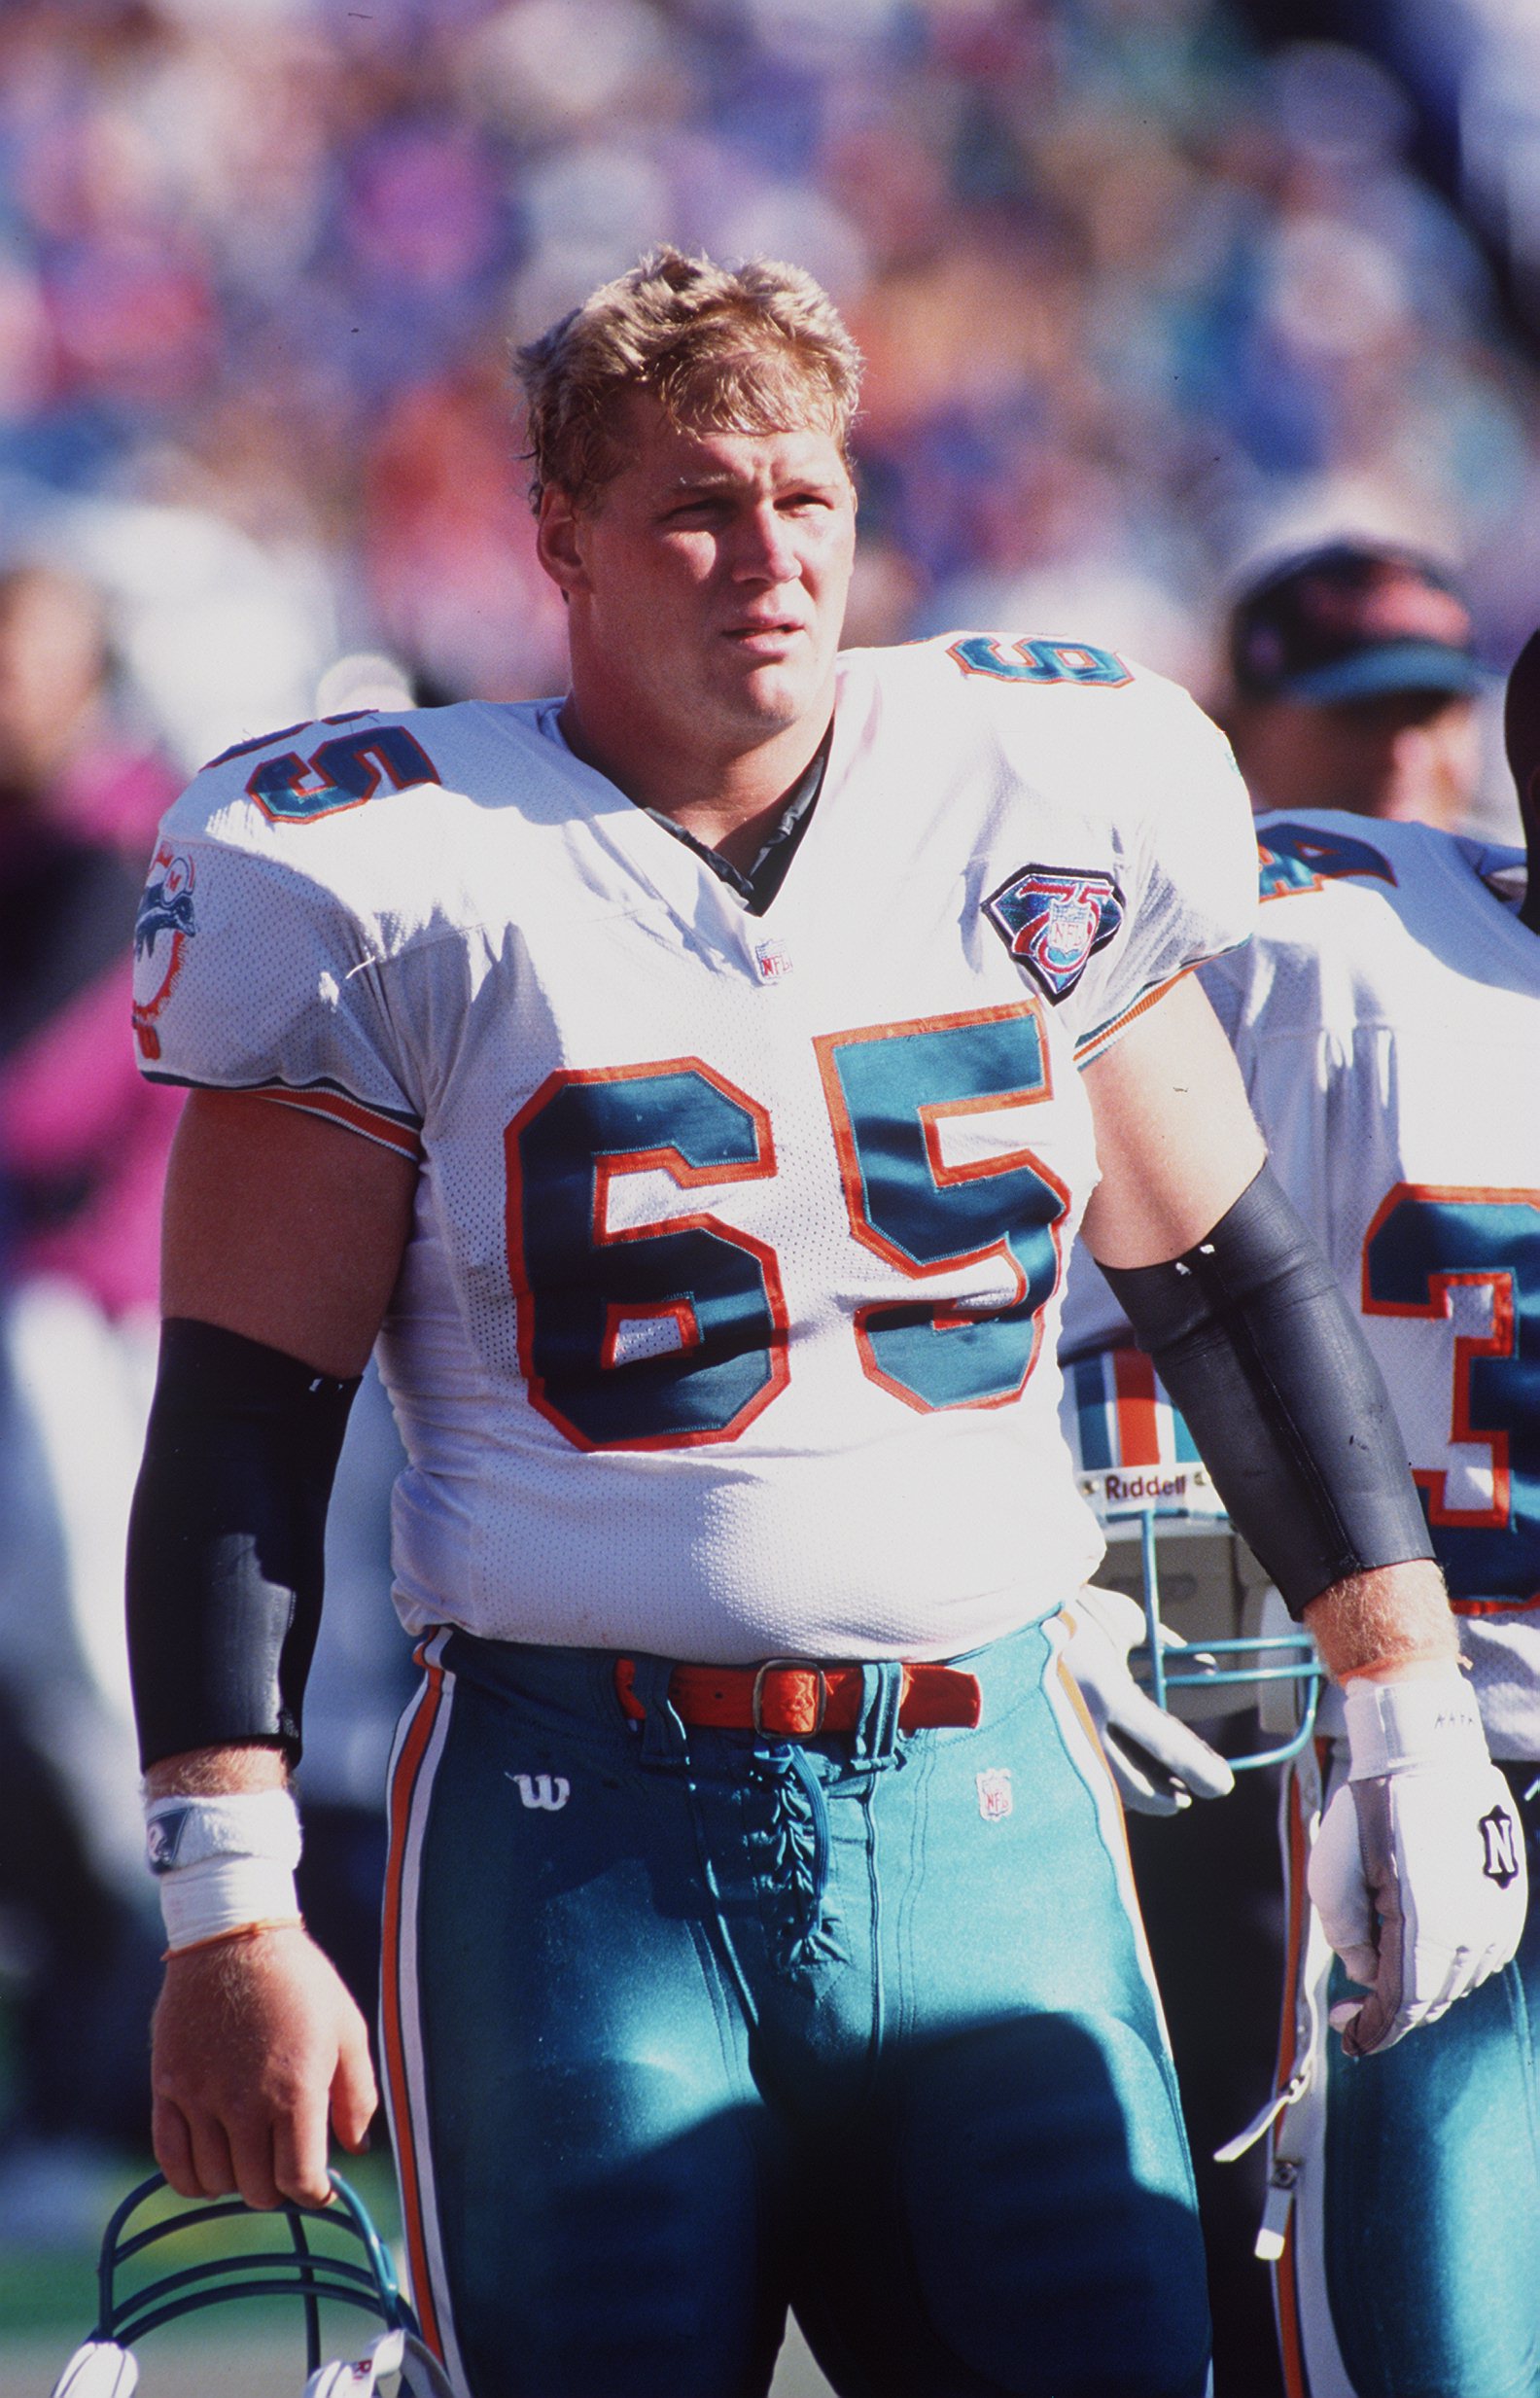 9 Oct 1994: JEFF DELLENBACH OF THE MIAMI DOLPHINS WATCHES THE ACTION FROM THE SIDELINES DURING THEIR 21-11 LOSS TO THE BUFFALO BILLS AT RICH STADIUM IN ORCHARD PARK, NEW YORK.